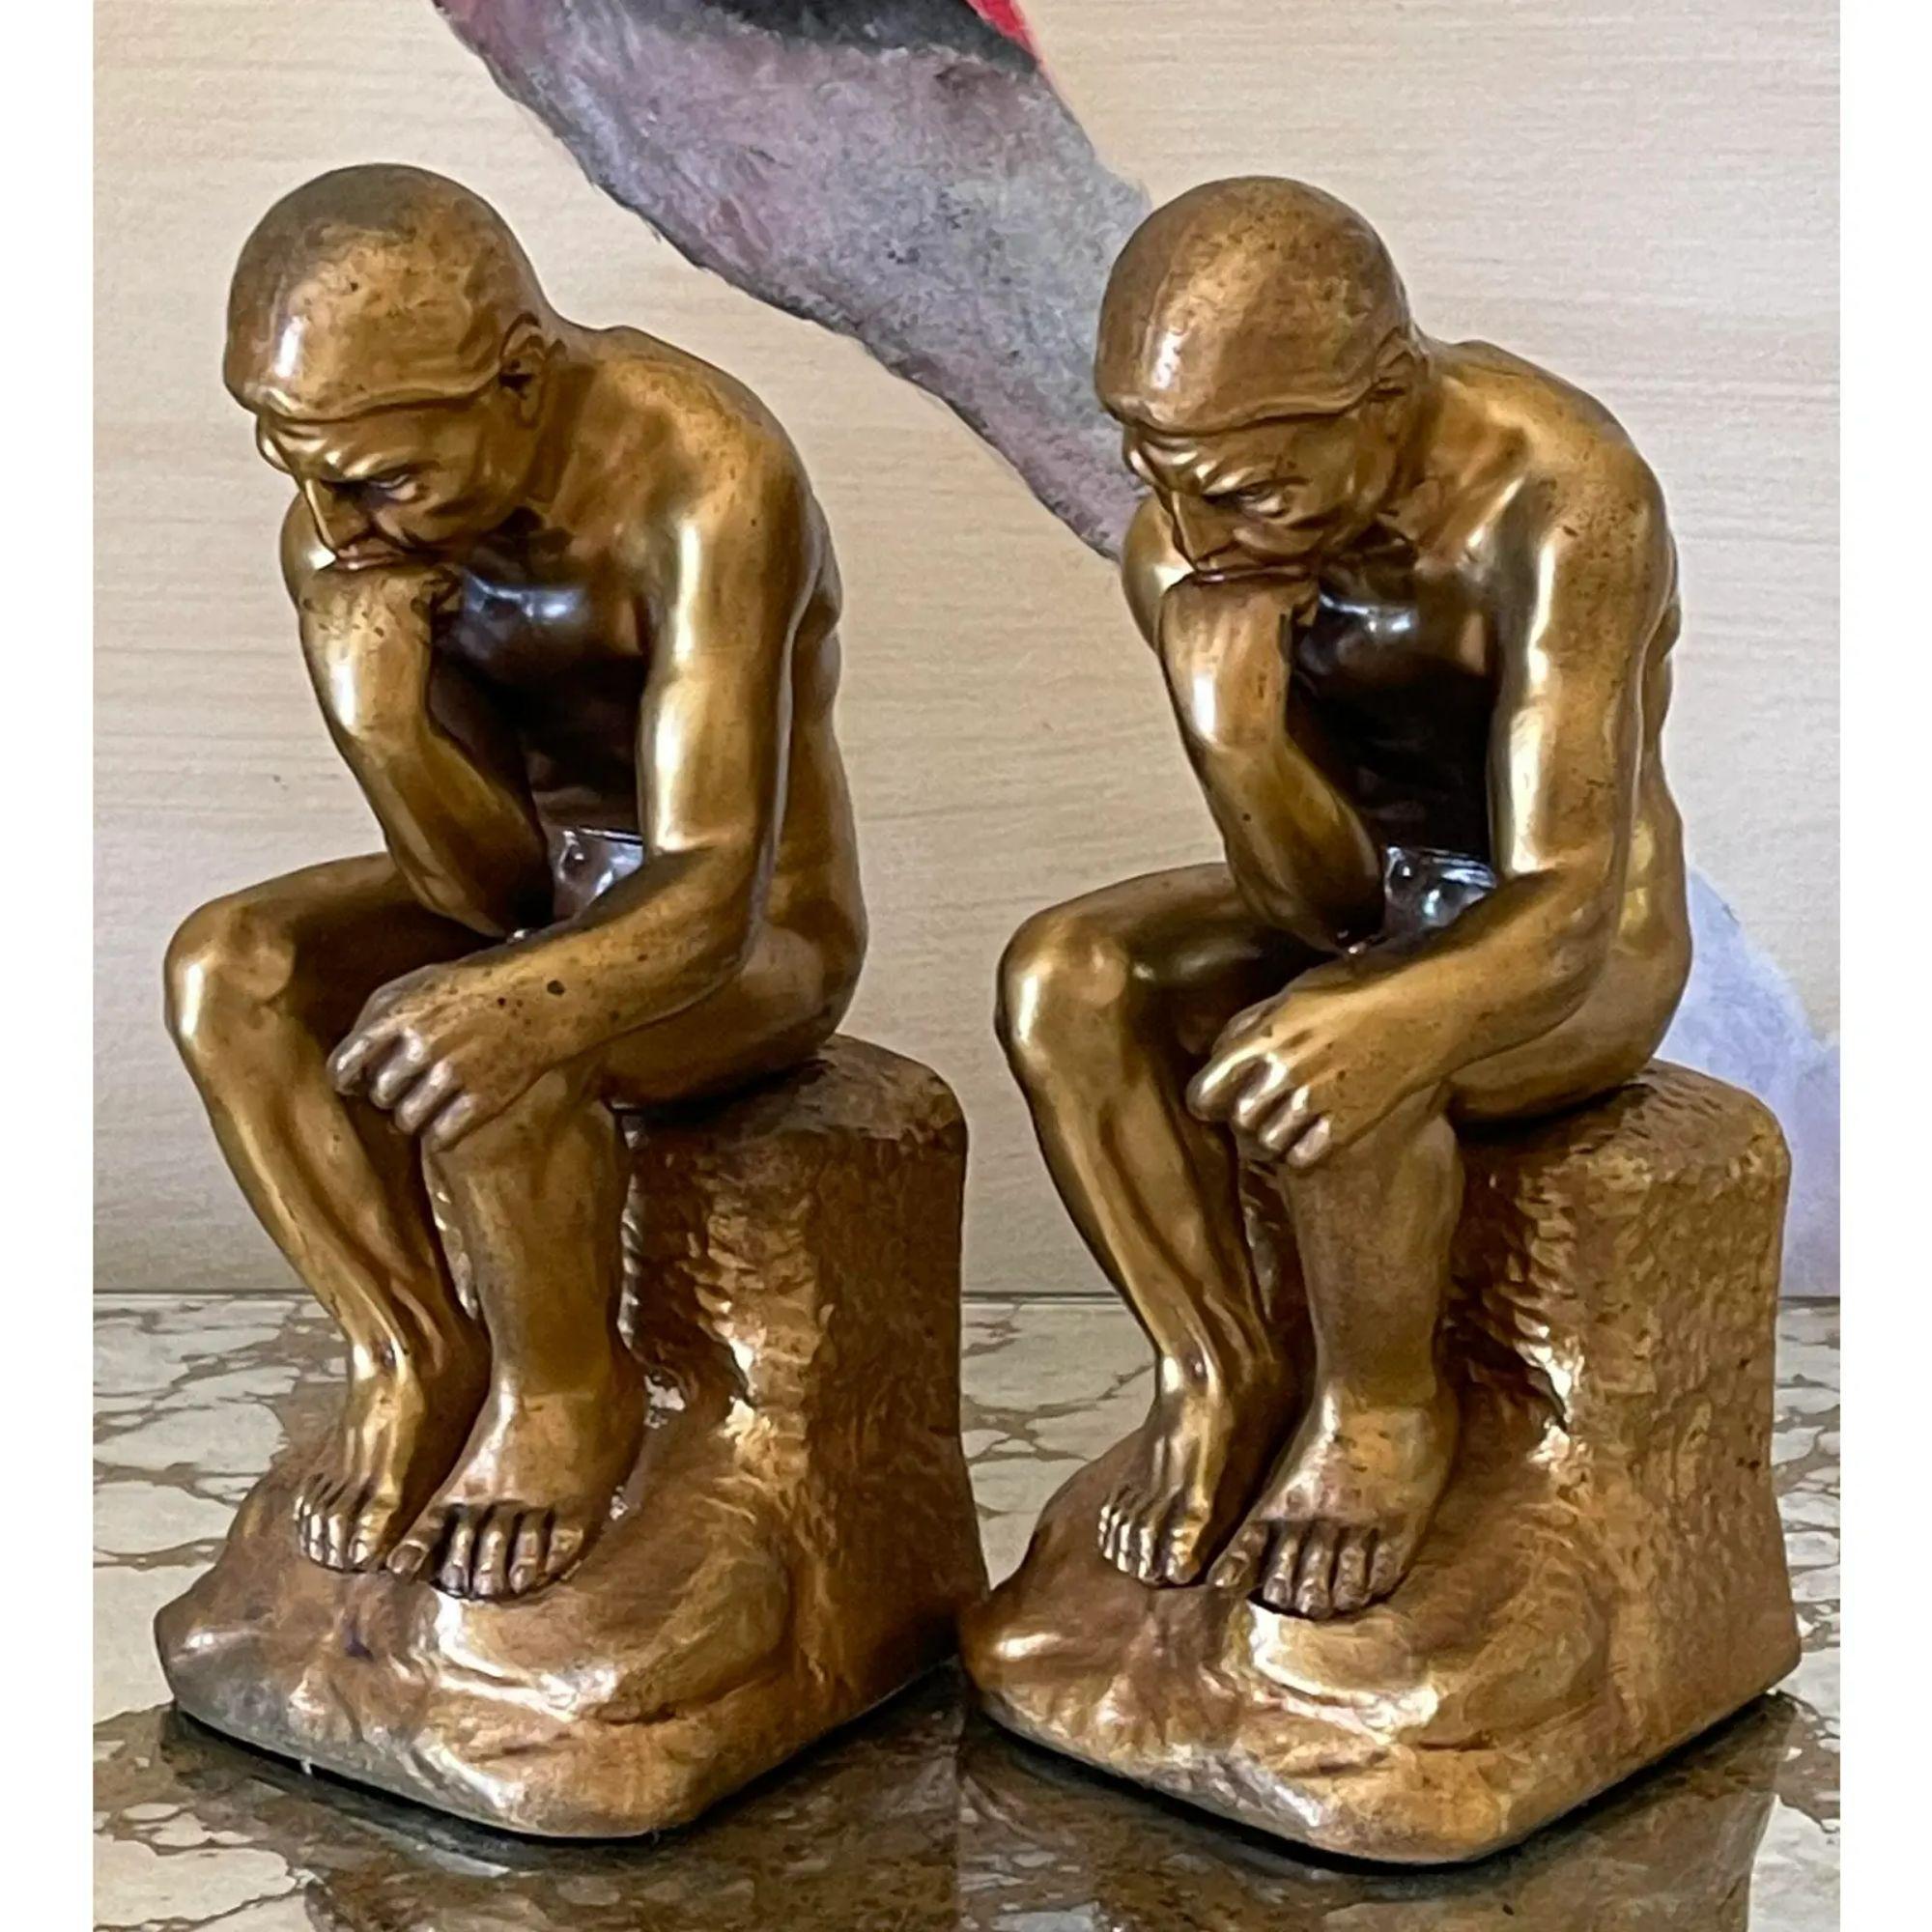 
Pair of Antique Male Nude Figural Bookends - the Thinker. Teach in gilt bronze clad and plaster filled.

Additional information:
Materials: Bronze, Plaster
Color: Gold
Period: 1910s
Styles: Art Deco, Figurative
Item Type: Vintage, Antique